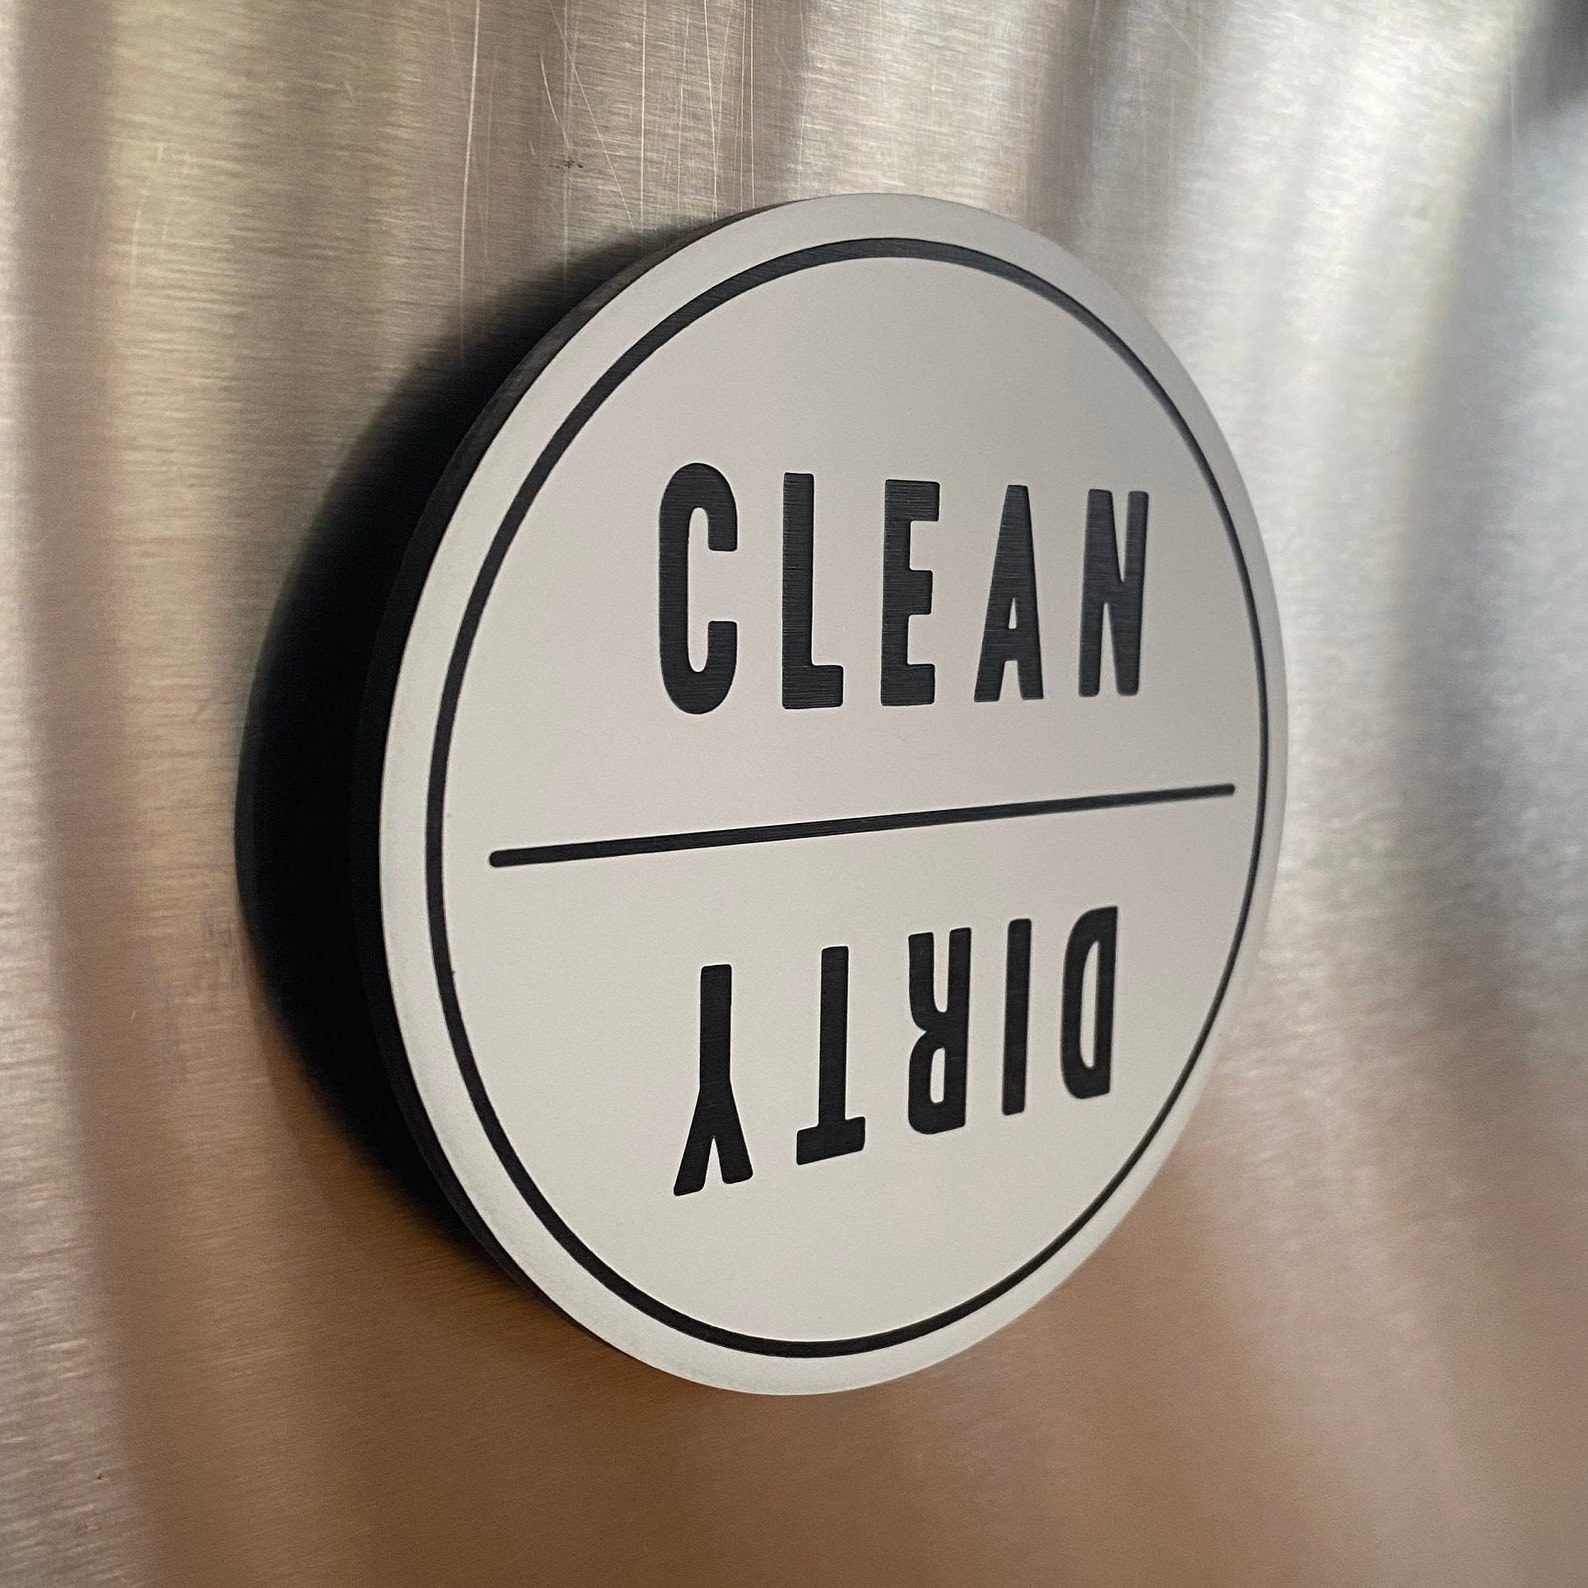 The white and black clean/dirty magnet stuck to a dishwasher